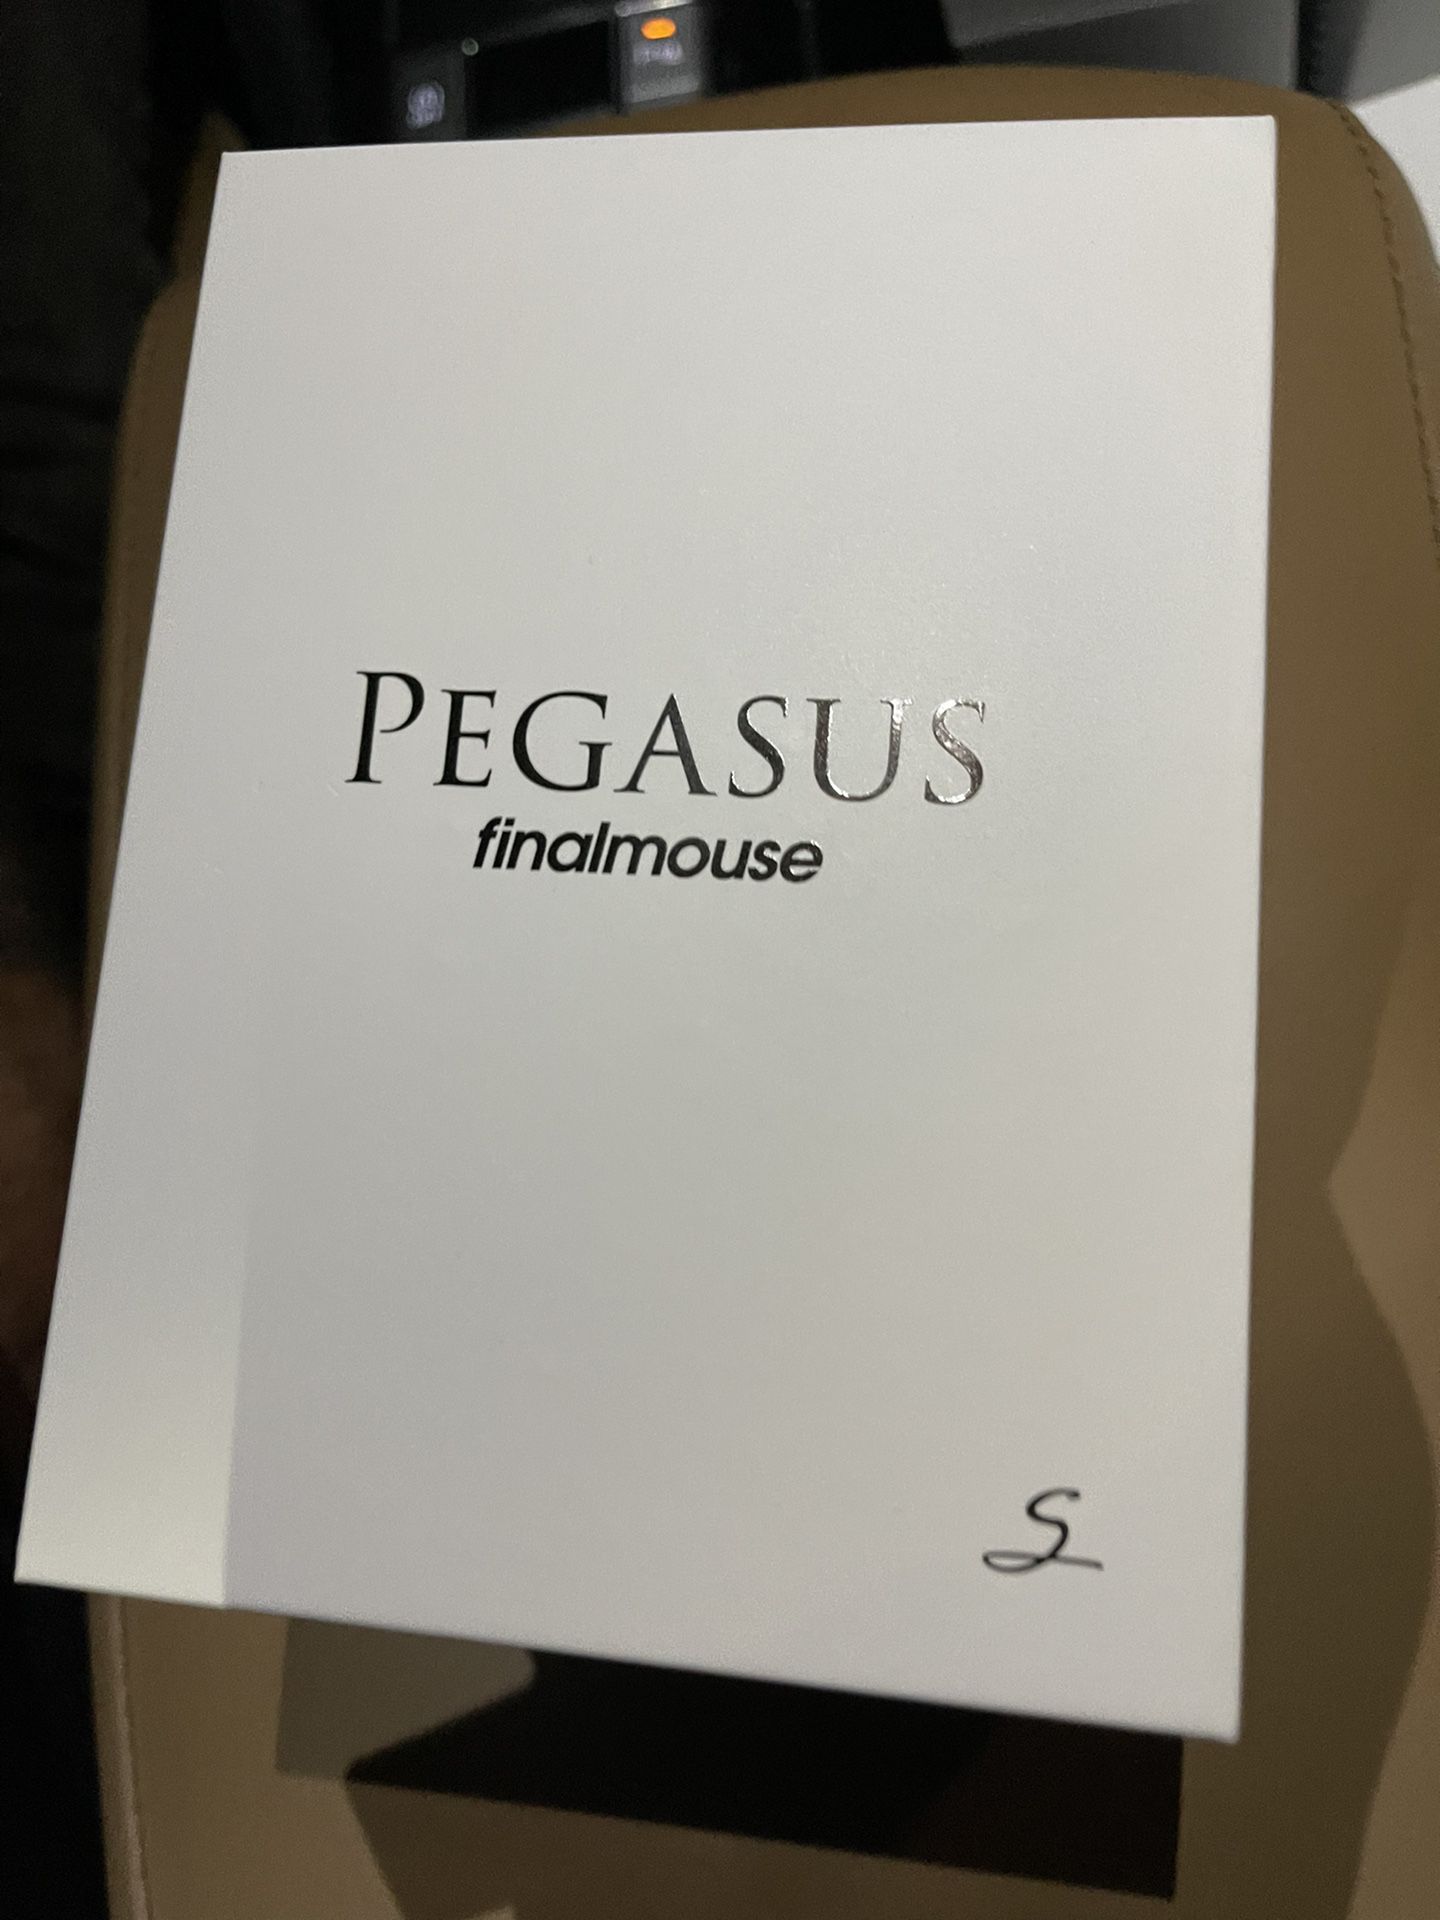 Finalmouse Starlight 12 PEGASUS Small Limited edition 1/5000 LE